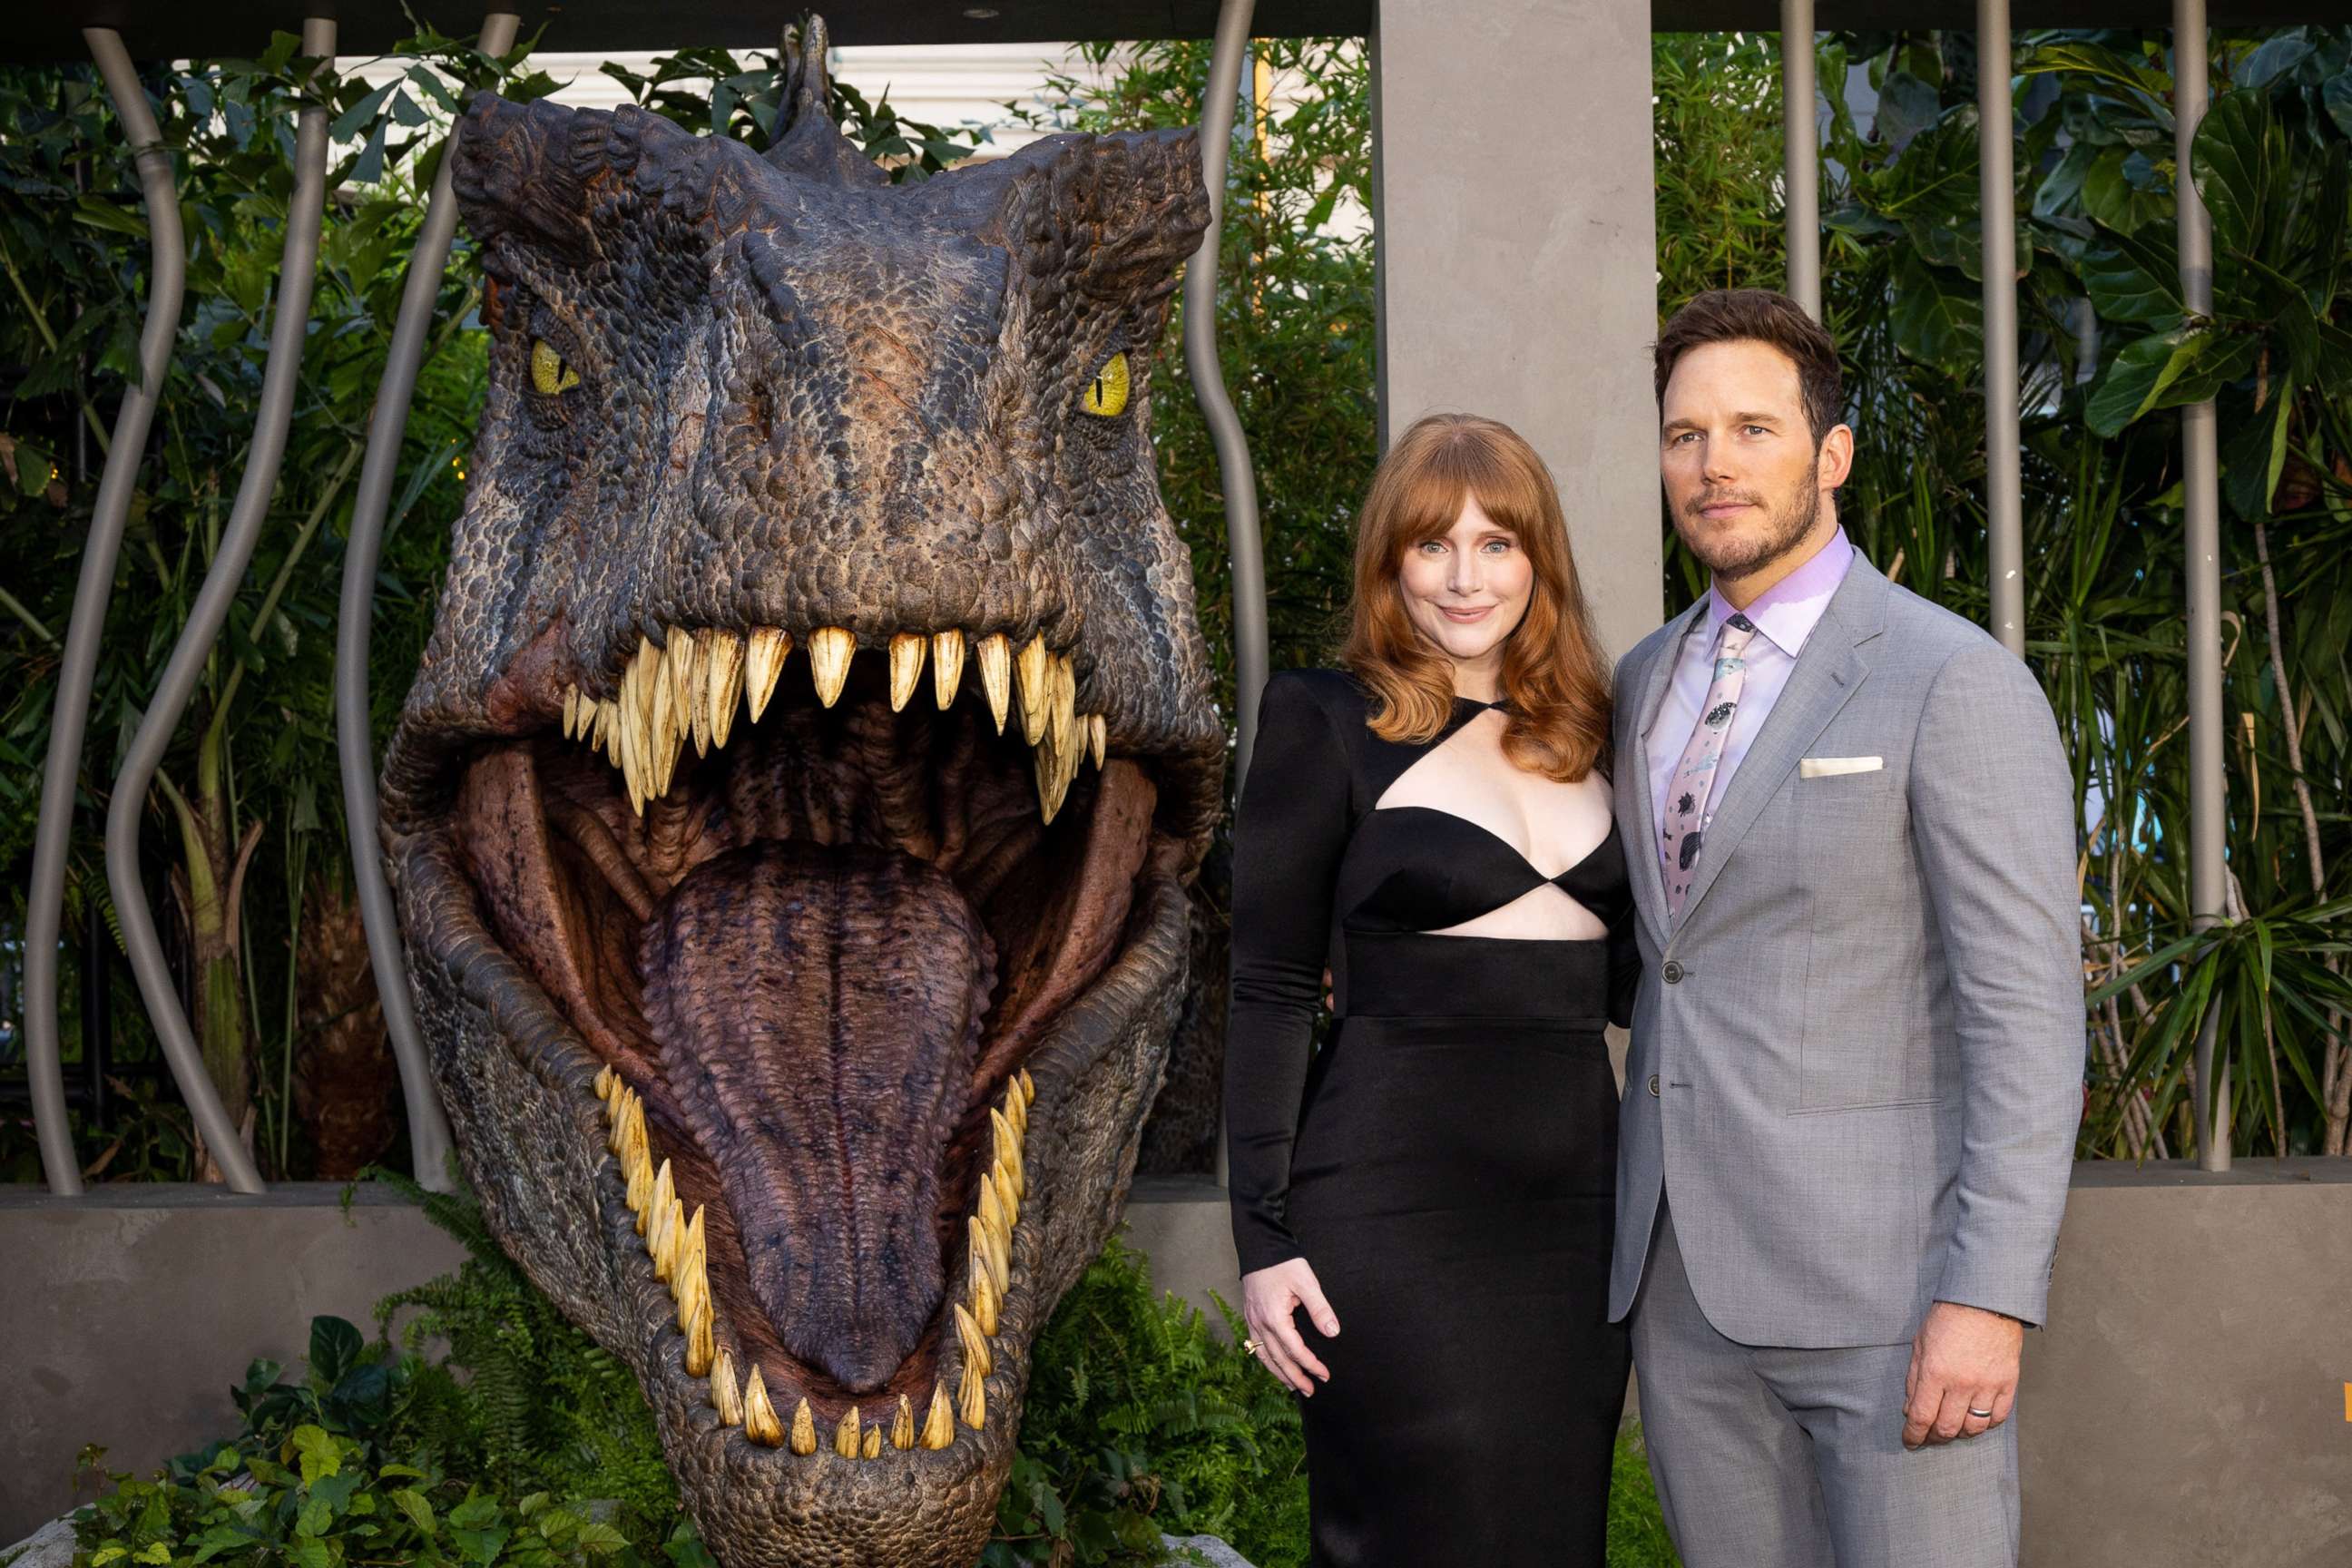 PHOTO: Bryce Dallas Howard and Chris Pratt attend the premiere of 'Jurassic World Dominion' in Los Angeles, June 06, 2022.